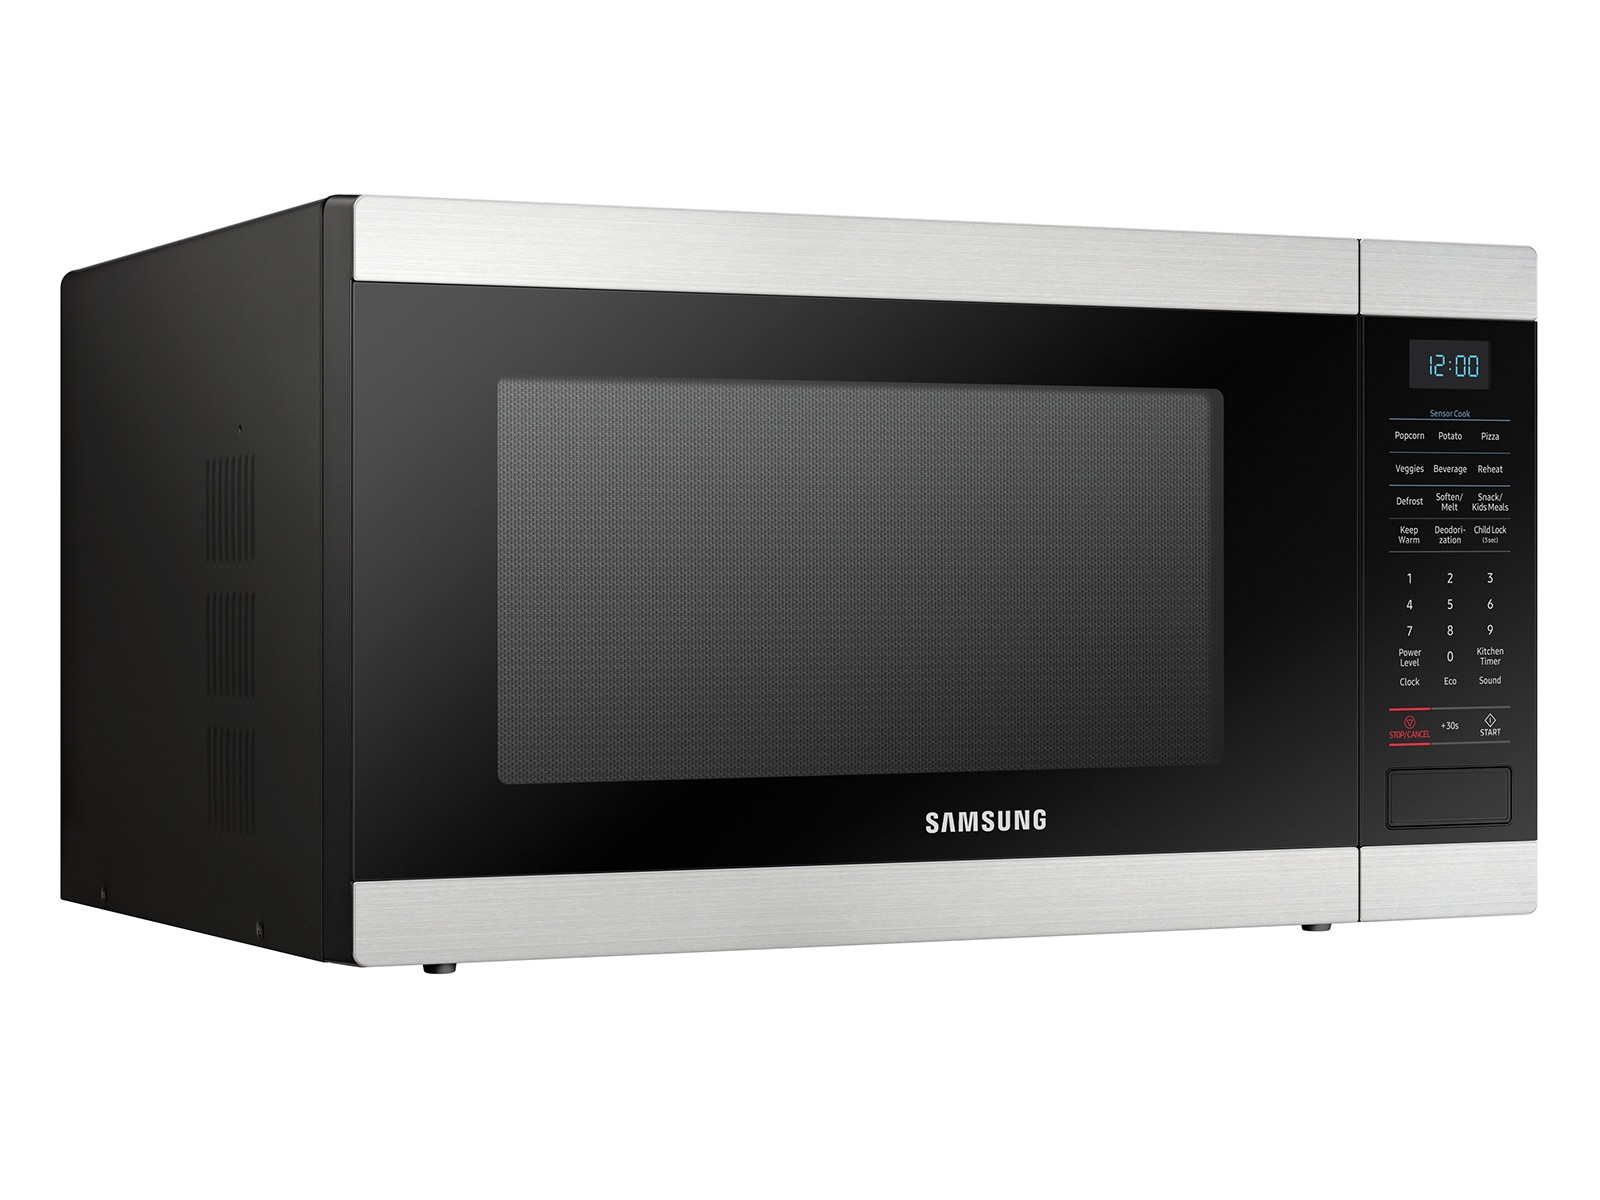 Samsung Space Saving Microwave, Countertop, White MD800WC Tested